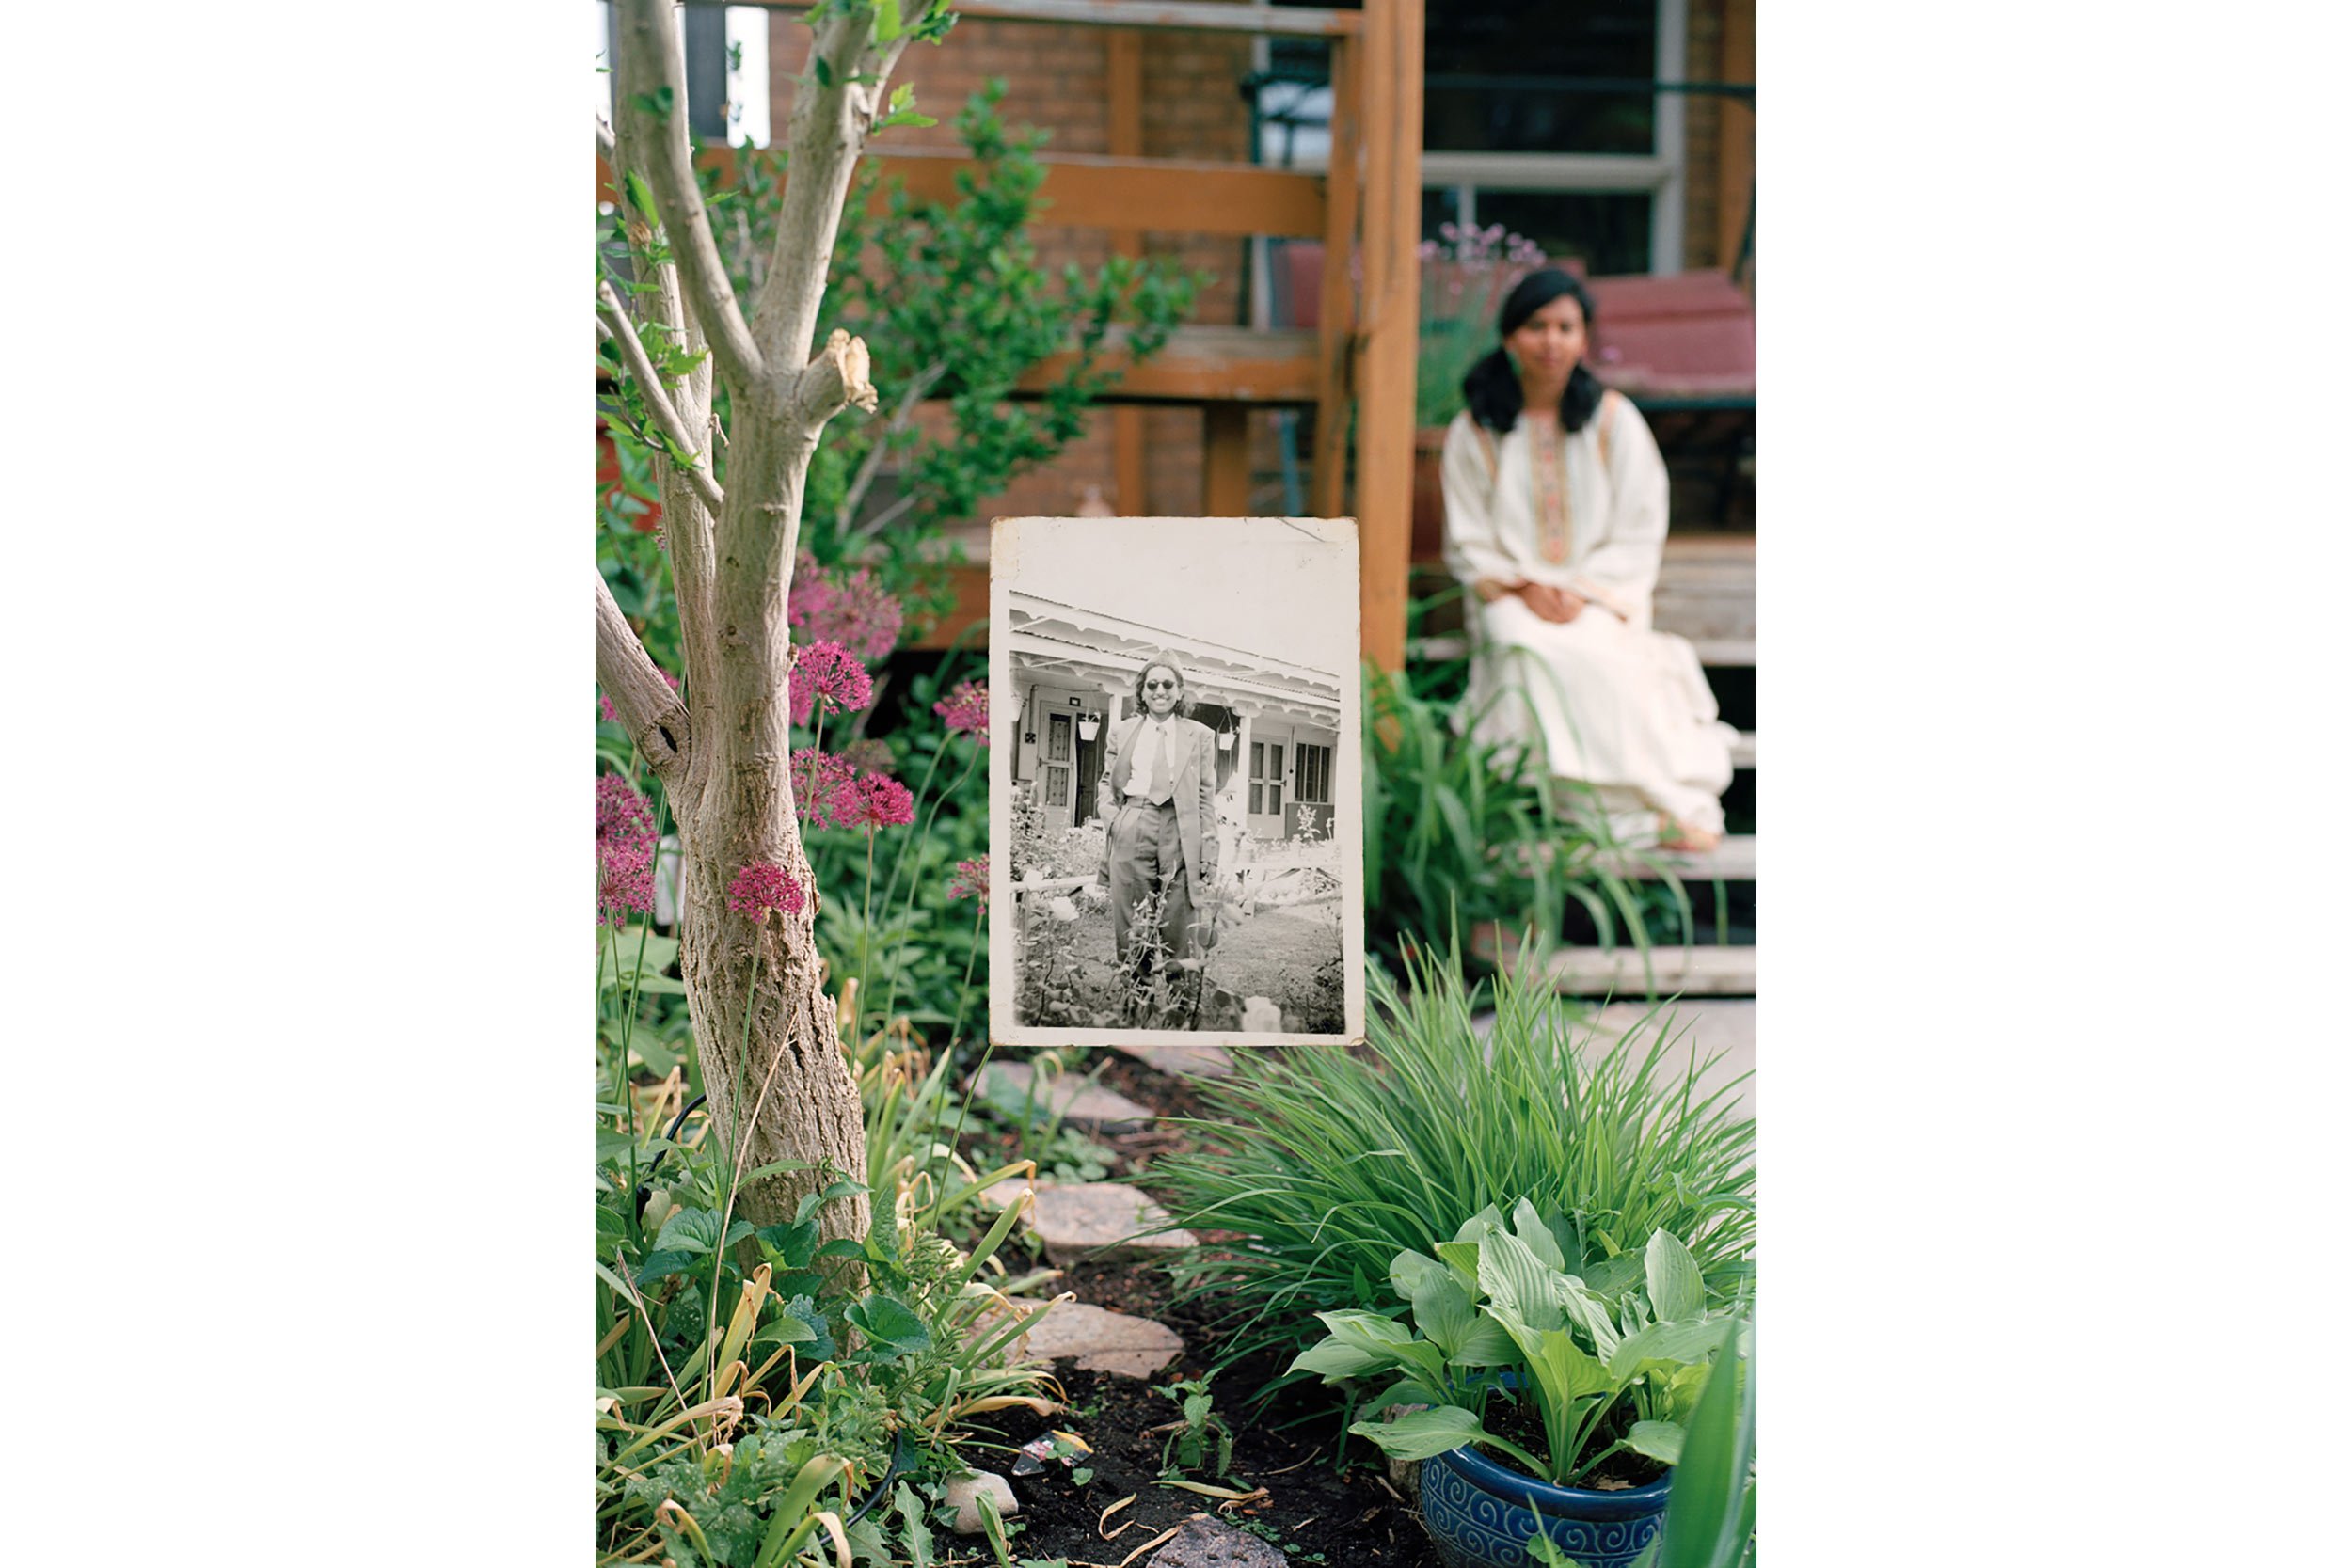   Past work:  Zinnia Naqvi,  Self-portrait with Nani in the Garden  (2017) from the series  Dear Nani  (2017—). 